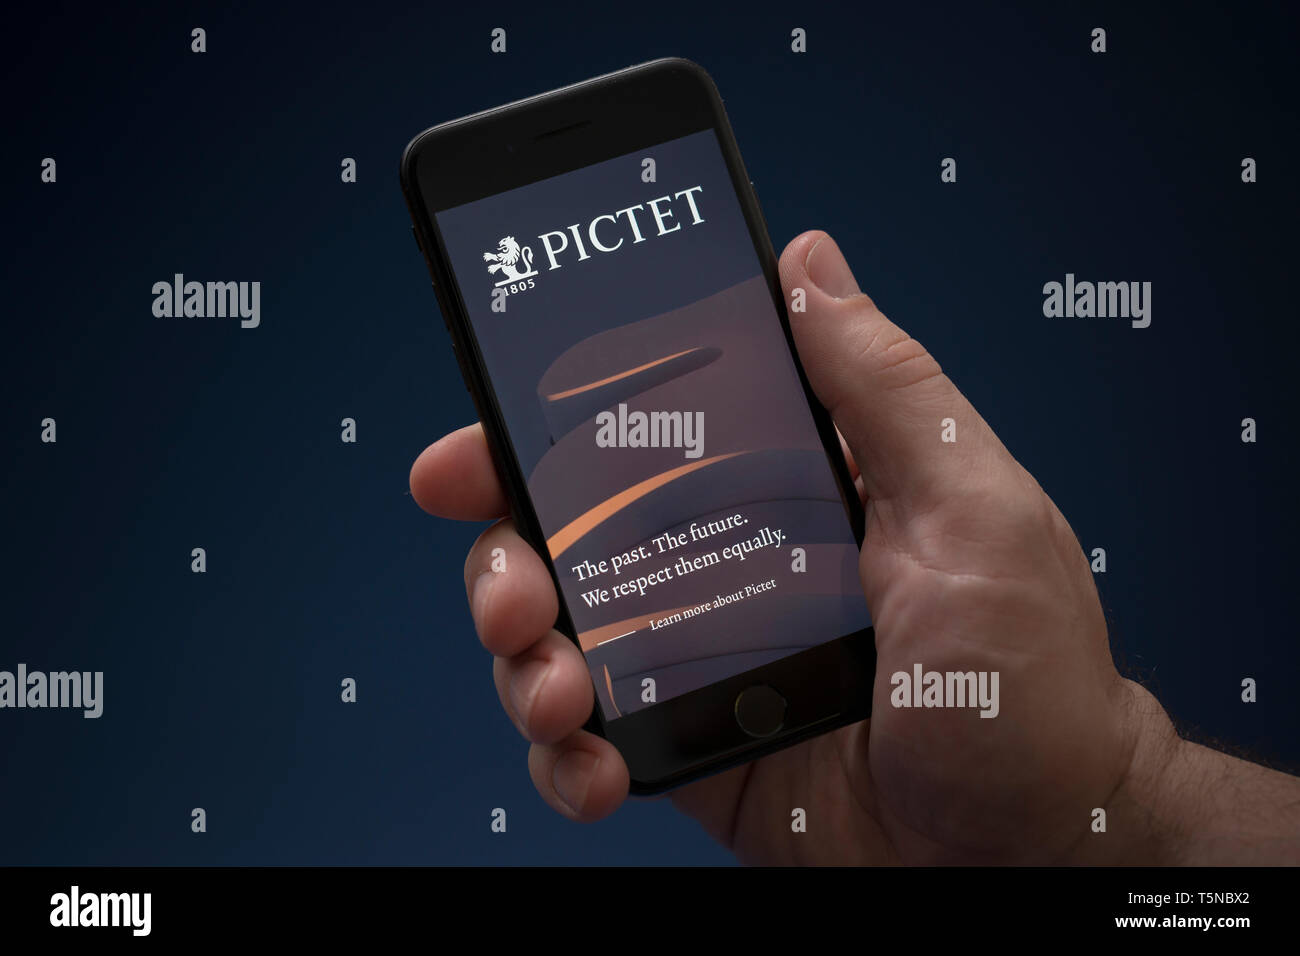 A man looks at his iPhone which displays the Pictet logo (Editorial use only). Stock Photo